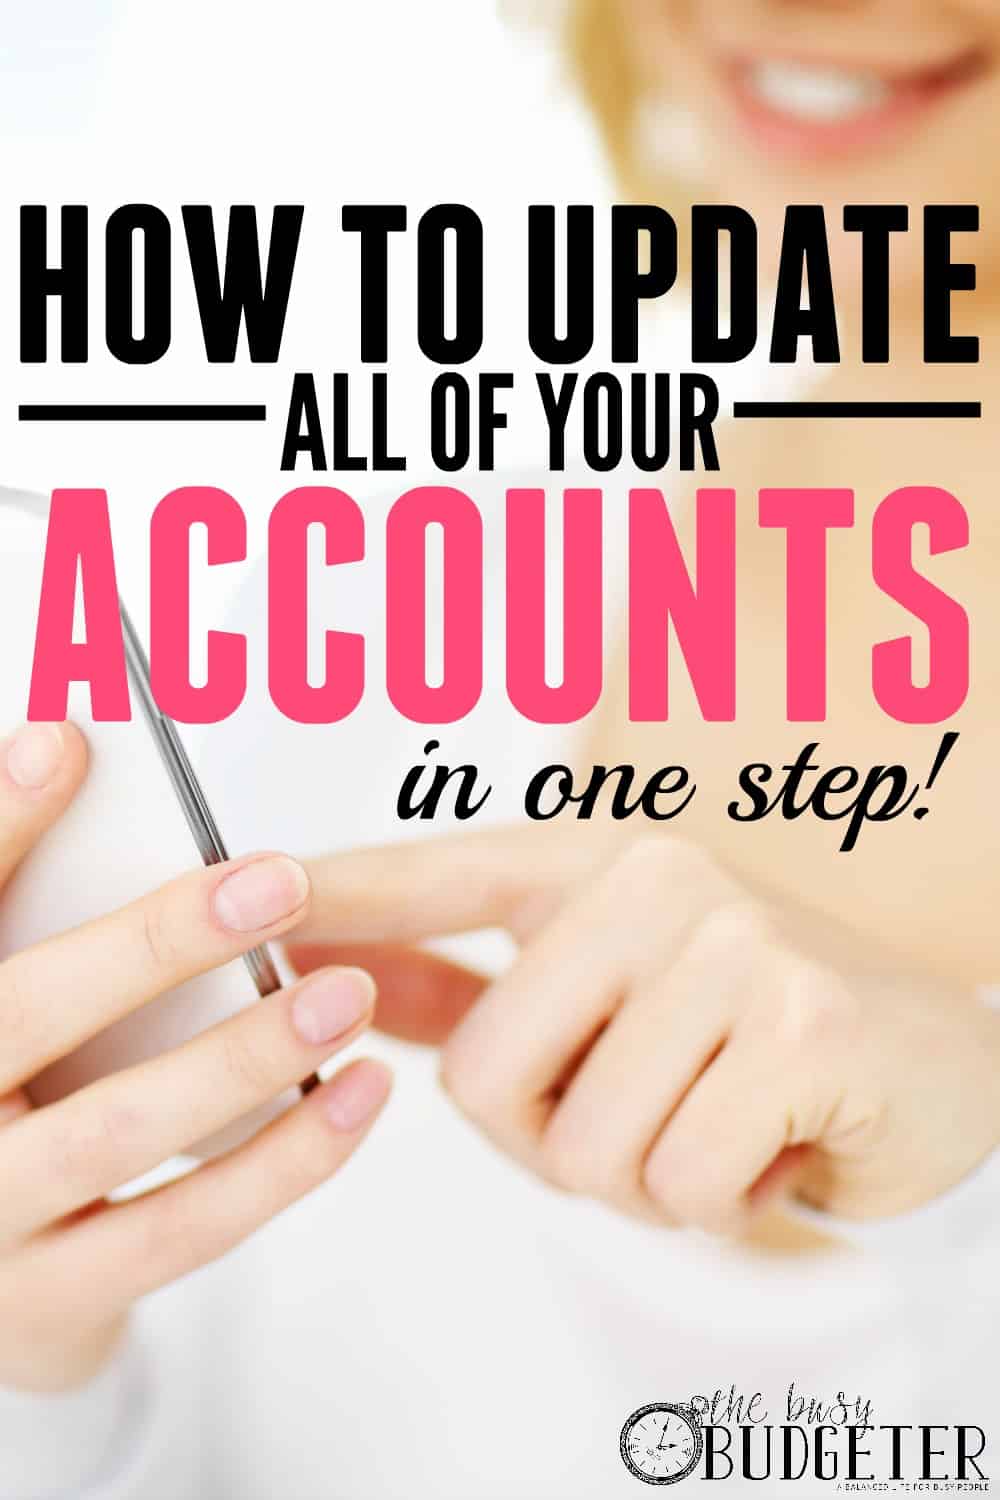 How to Update All of Your Accounts in One Step! Dude. Not cool. I just updated 14 accounts with my new debit card information when I changed banks. It took me almost 4 hours!!! Why didn't I see this yesterday?! Day late and a dollar short Pinterest!!! 